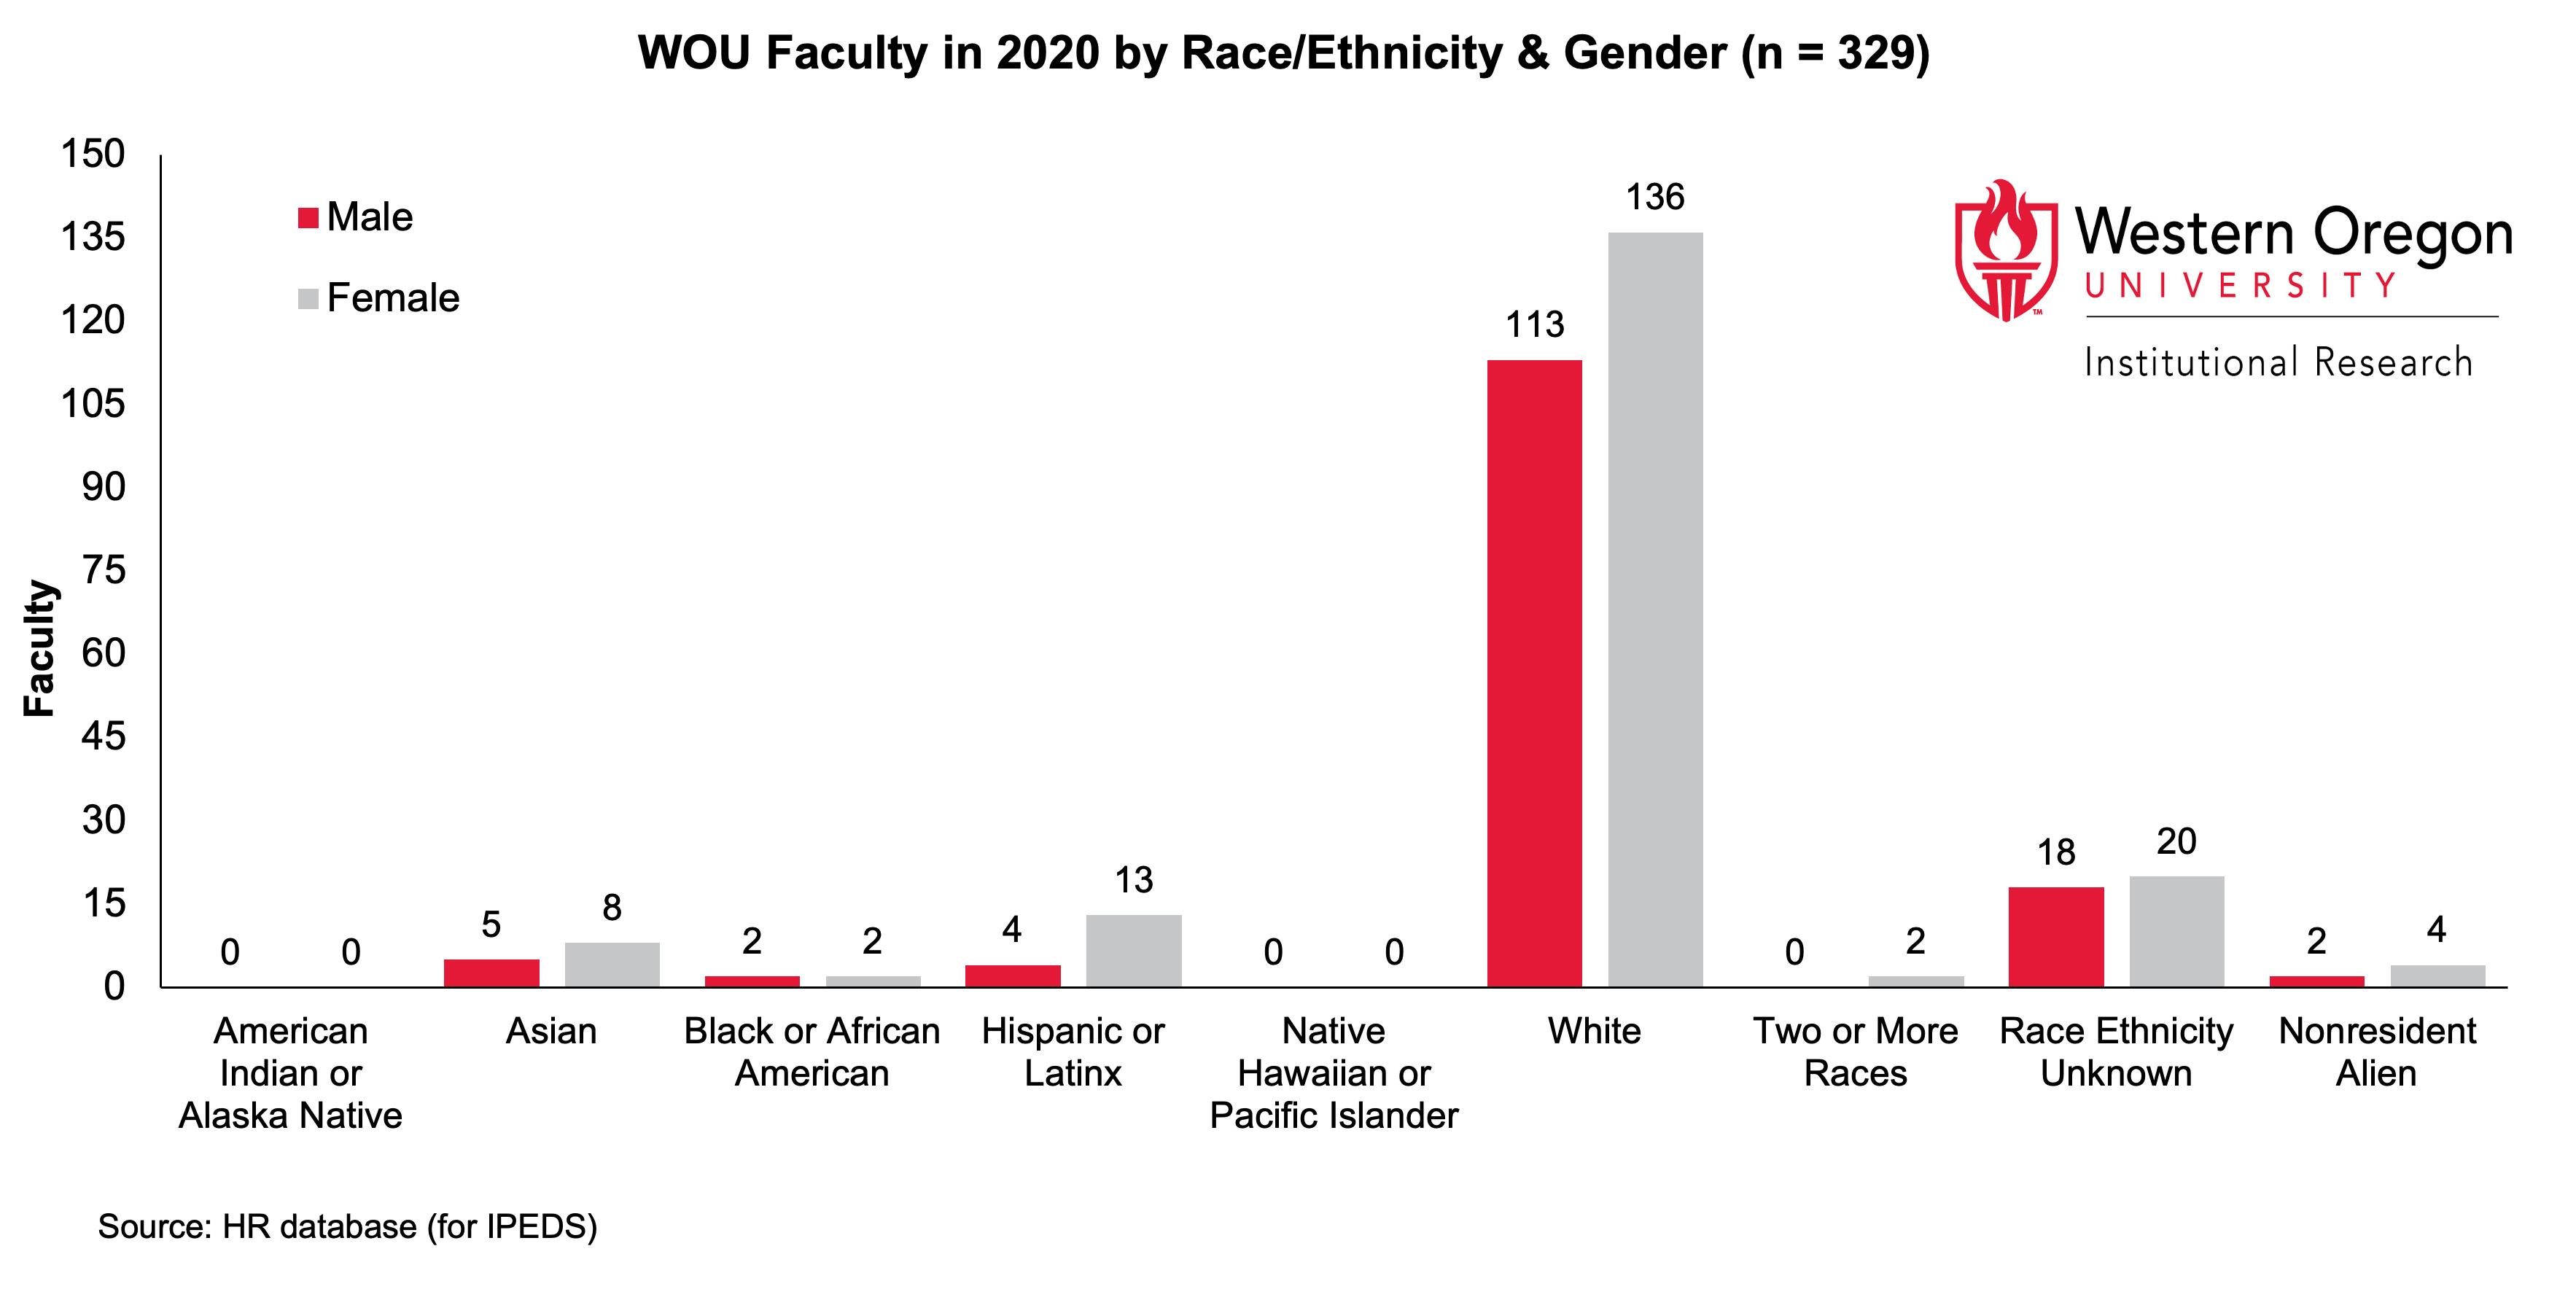 Bar graph of counts for faculty at WOU in 2020, broken out by race/ethnicity categories and gender, showing that female faculty outnumber male faculty